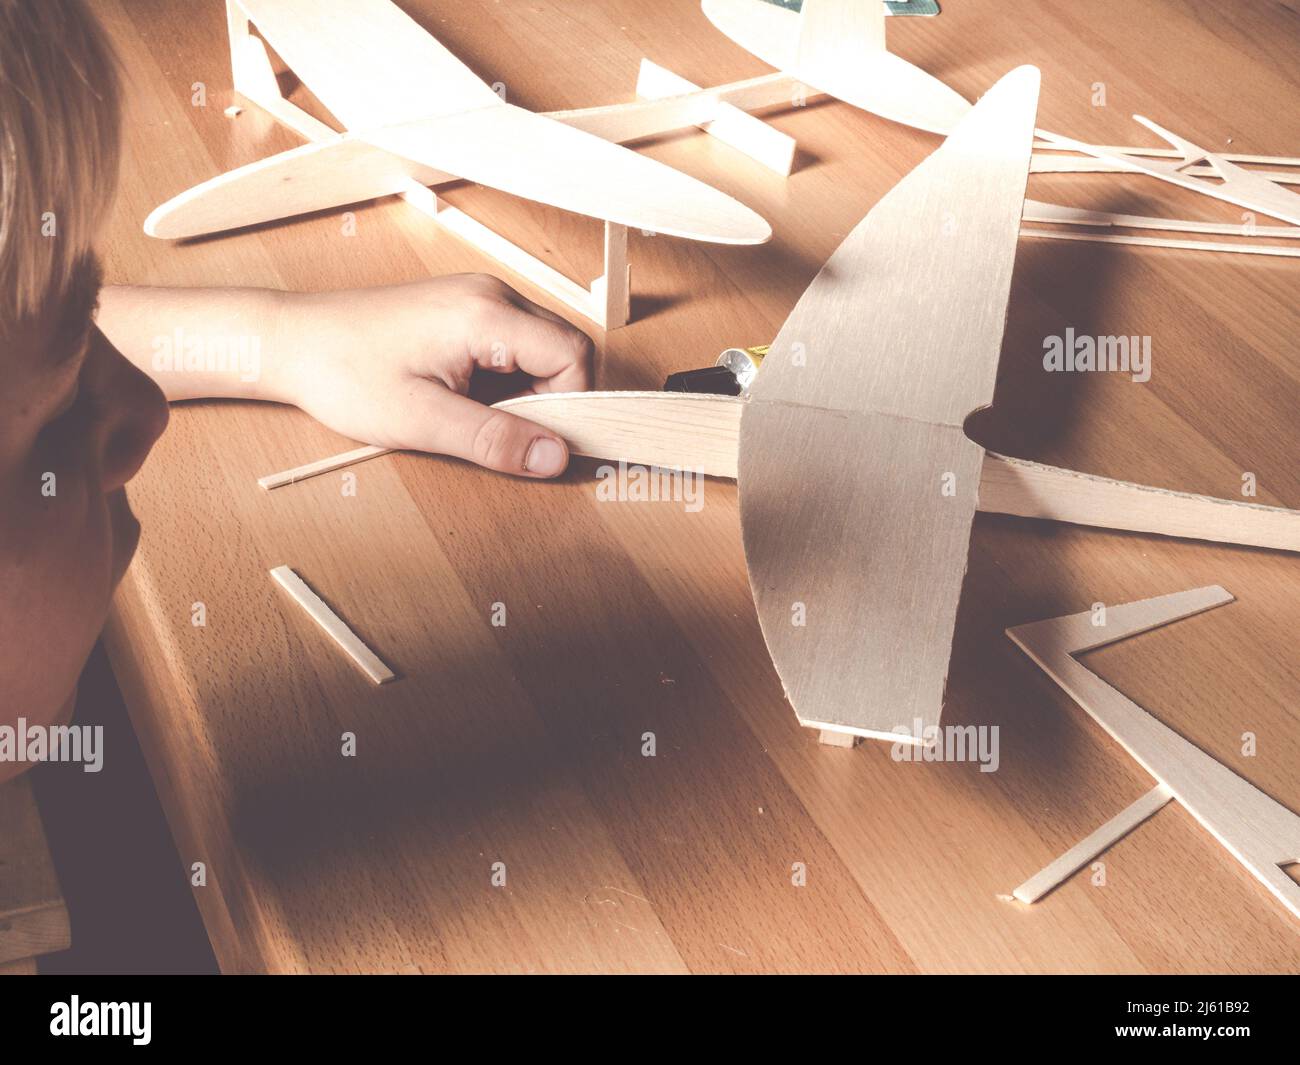 boy holding a wooden plane model; aircraft construction made of balsa wood Stock Photo